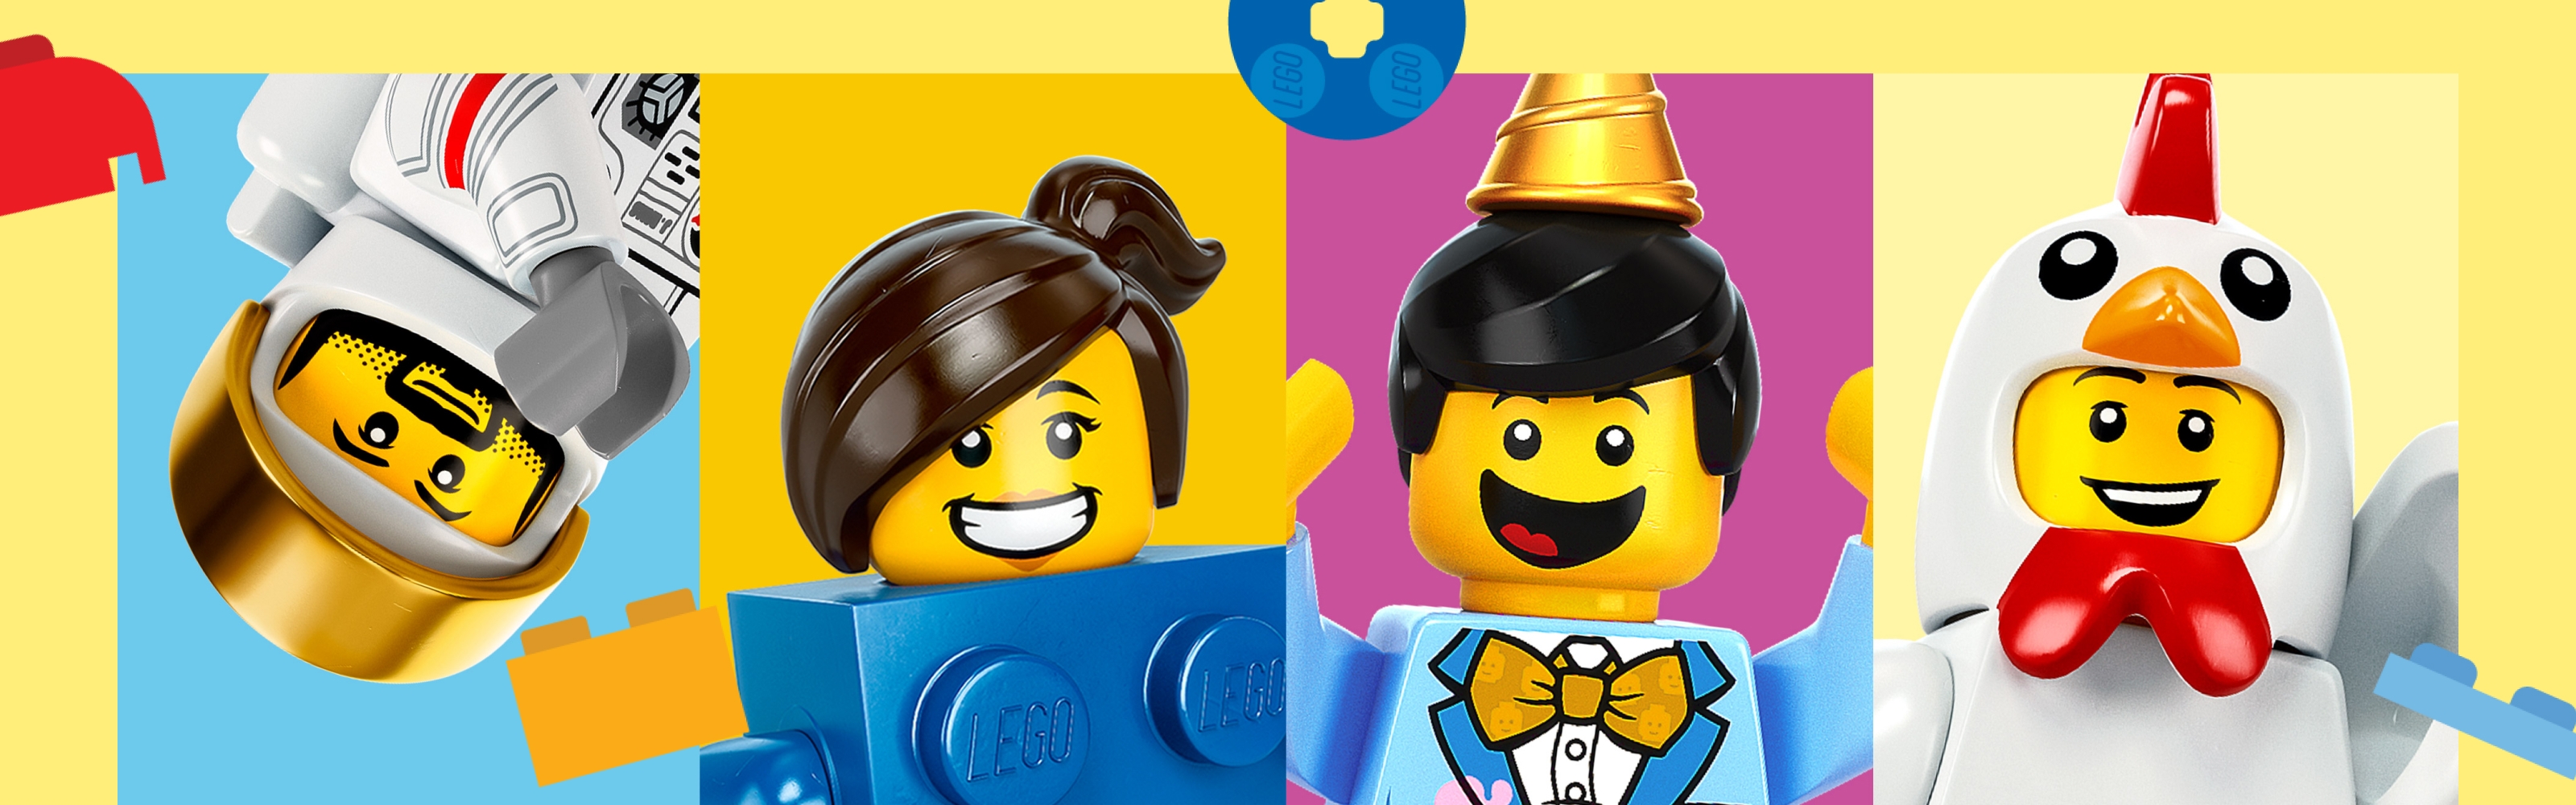 templates, printables and invites | lego® birthday party